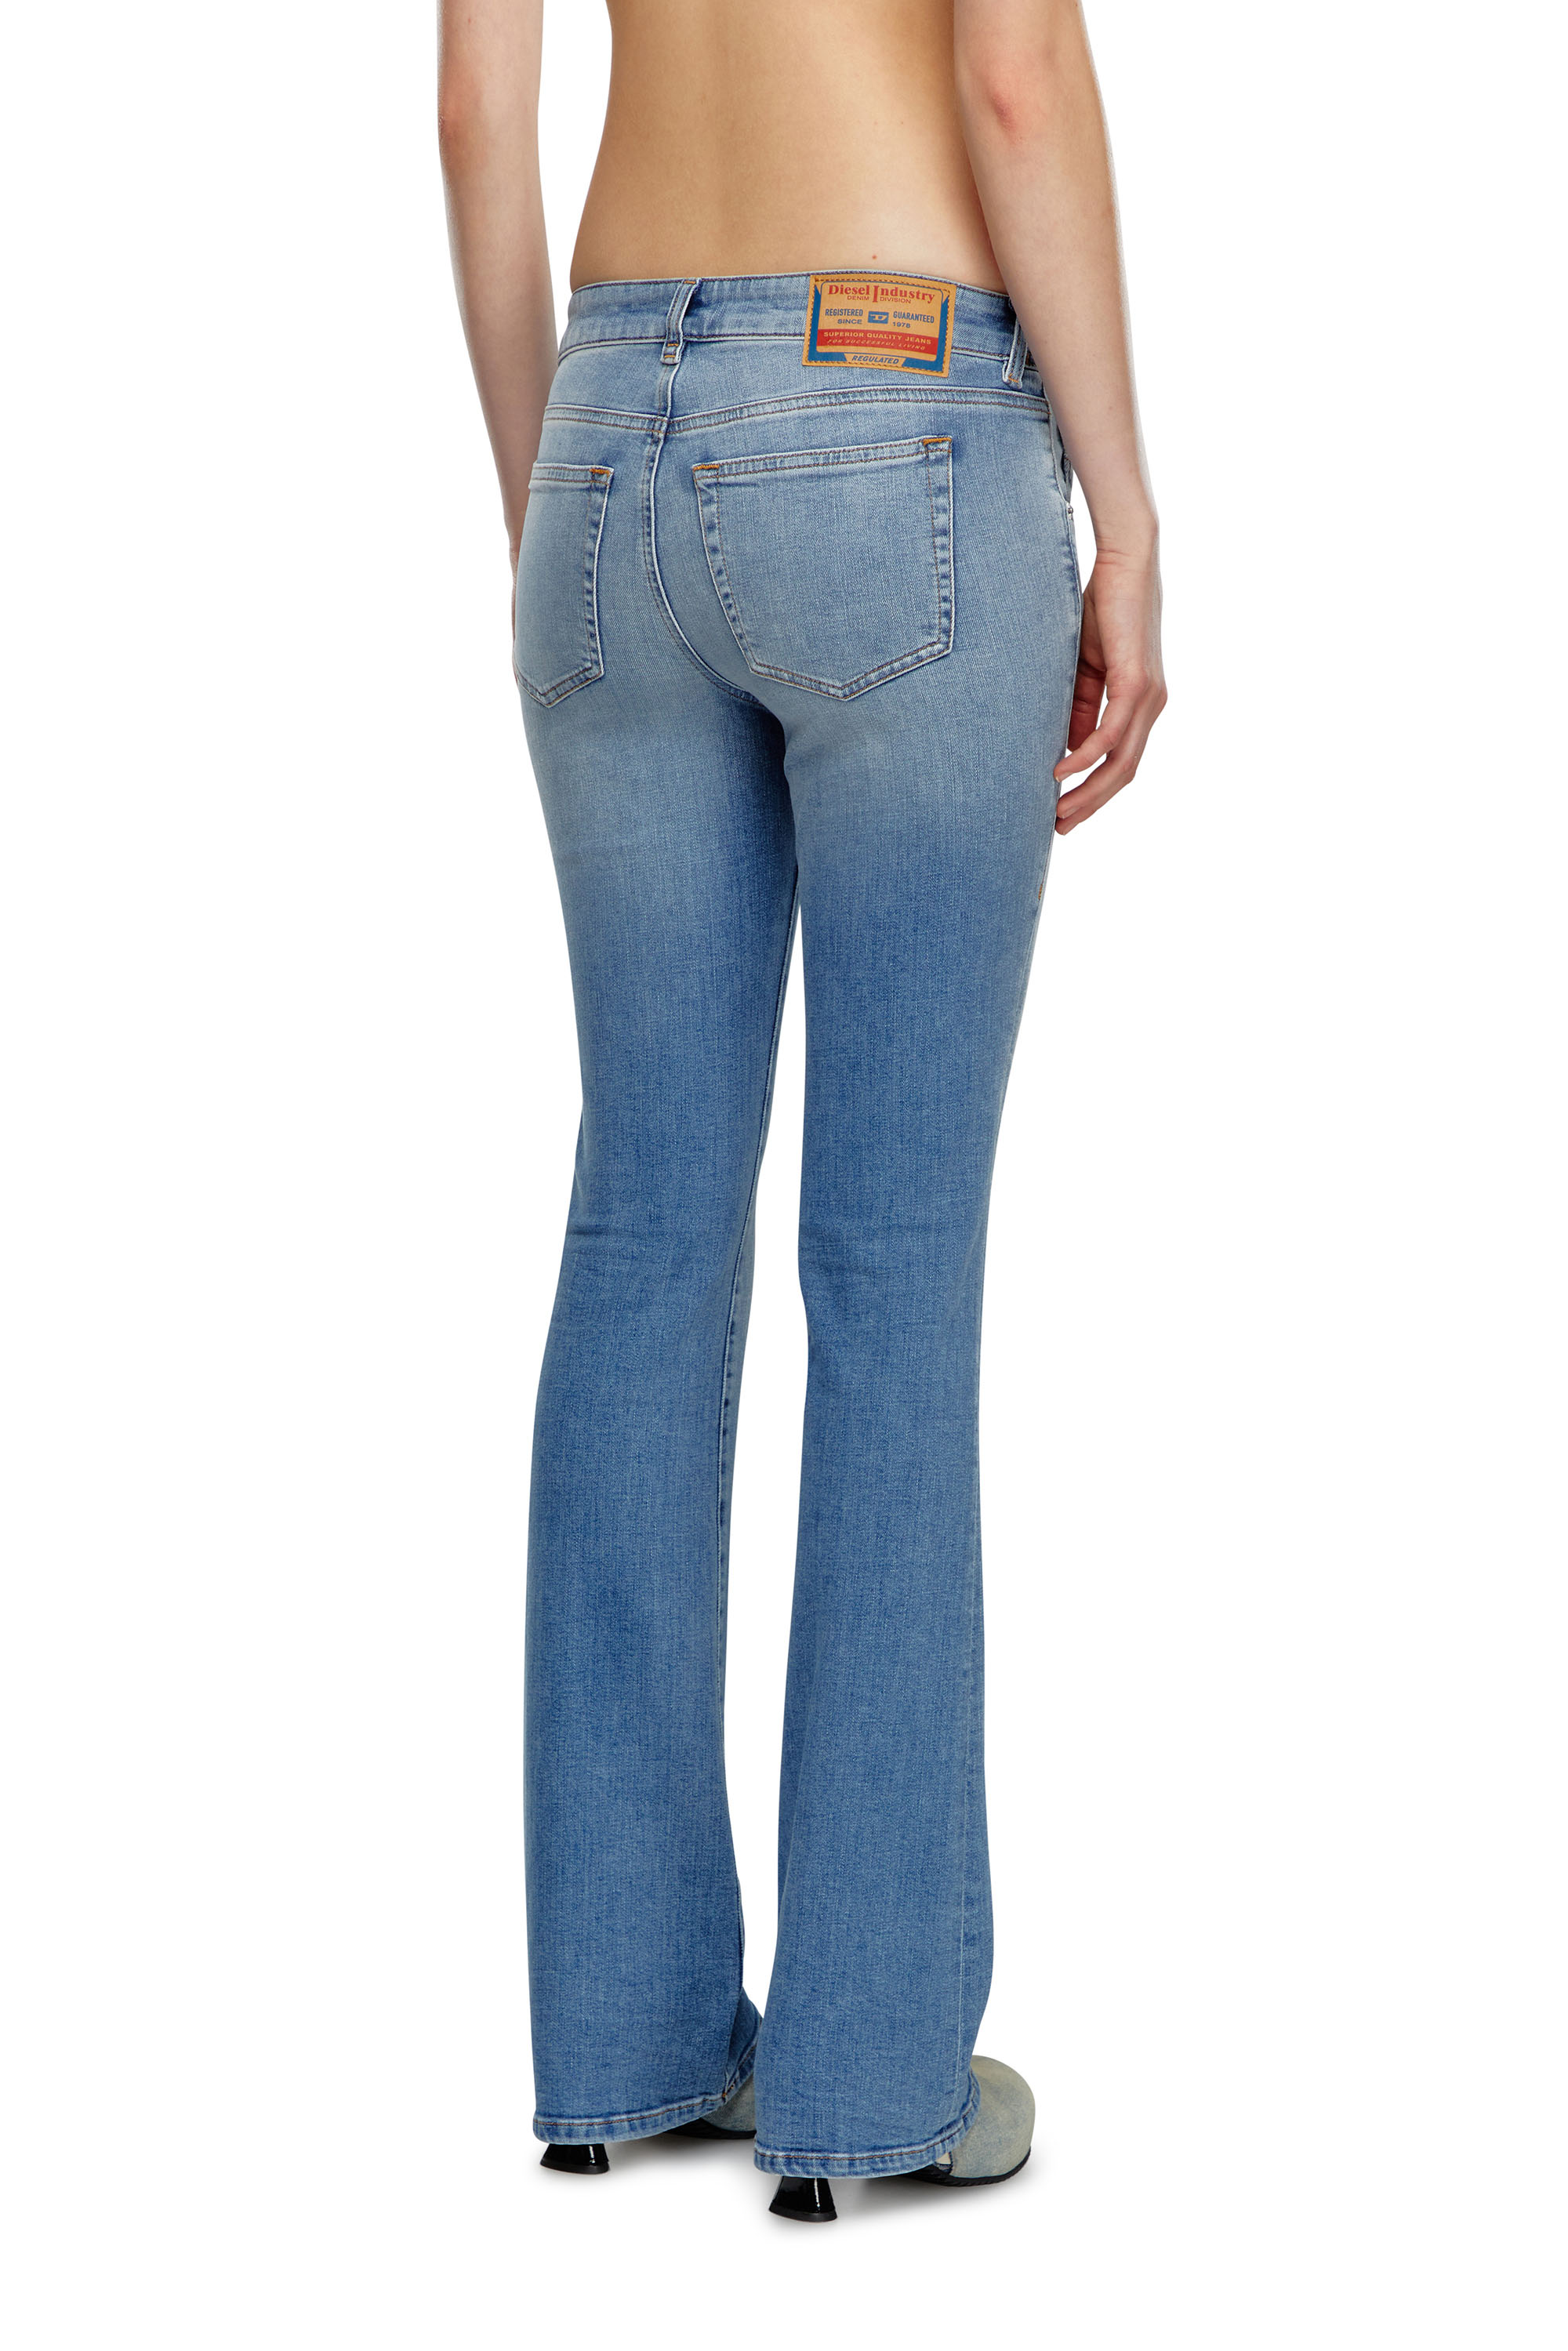 Diesel - Bootcut and Flare Jeans 1969 D-Ebbey 09K06, Mujer Bootcut y Flare Jeans - 1969 D-Ebbey in Azul marino - Image 4